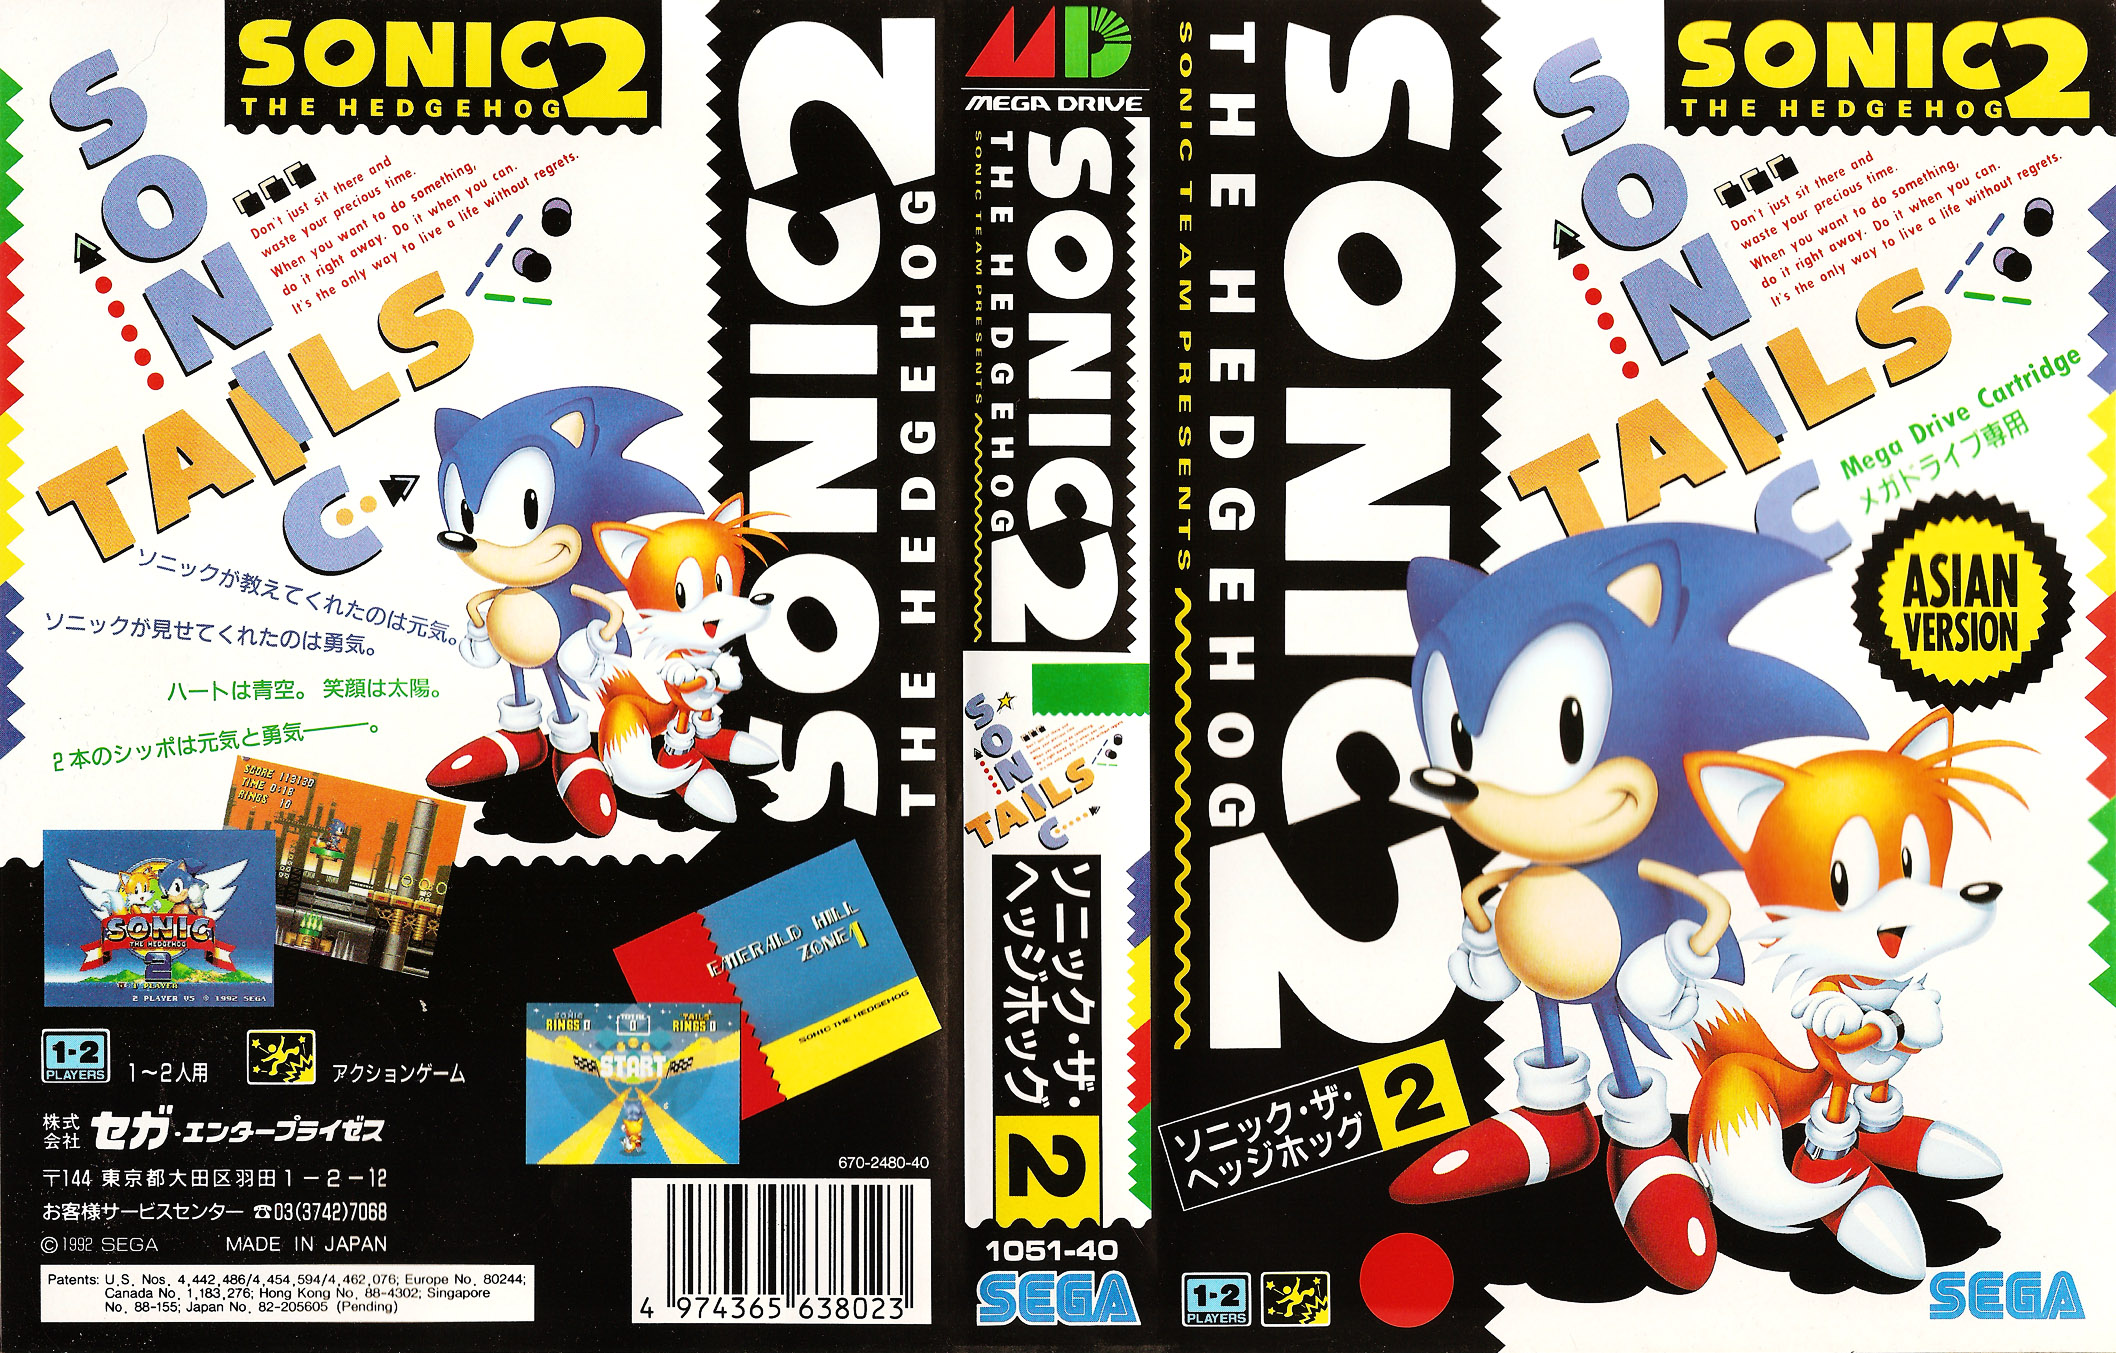 Sonic2_md_asia_cover.jpg